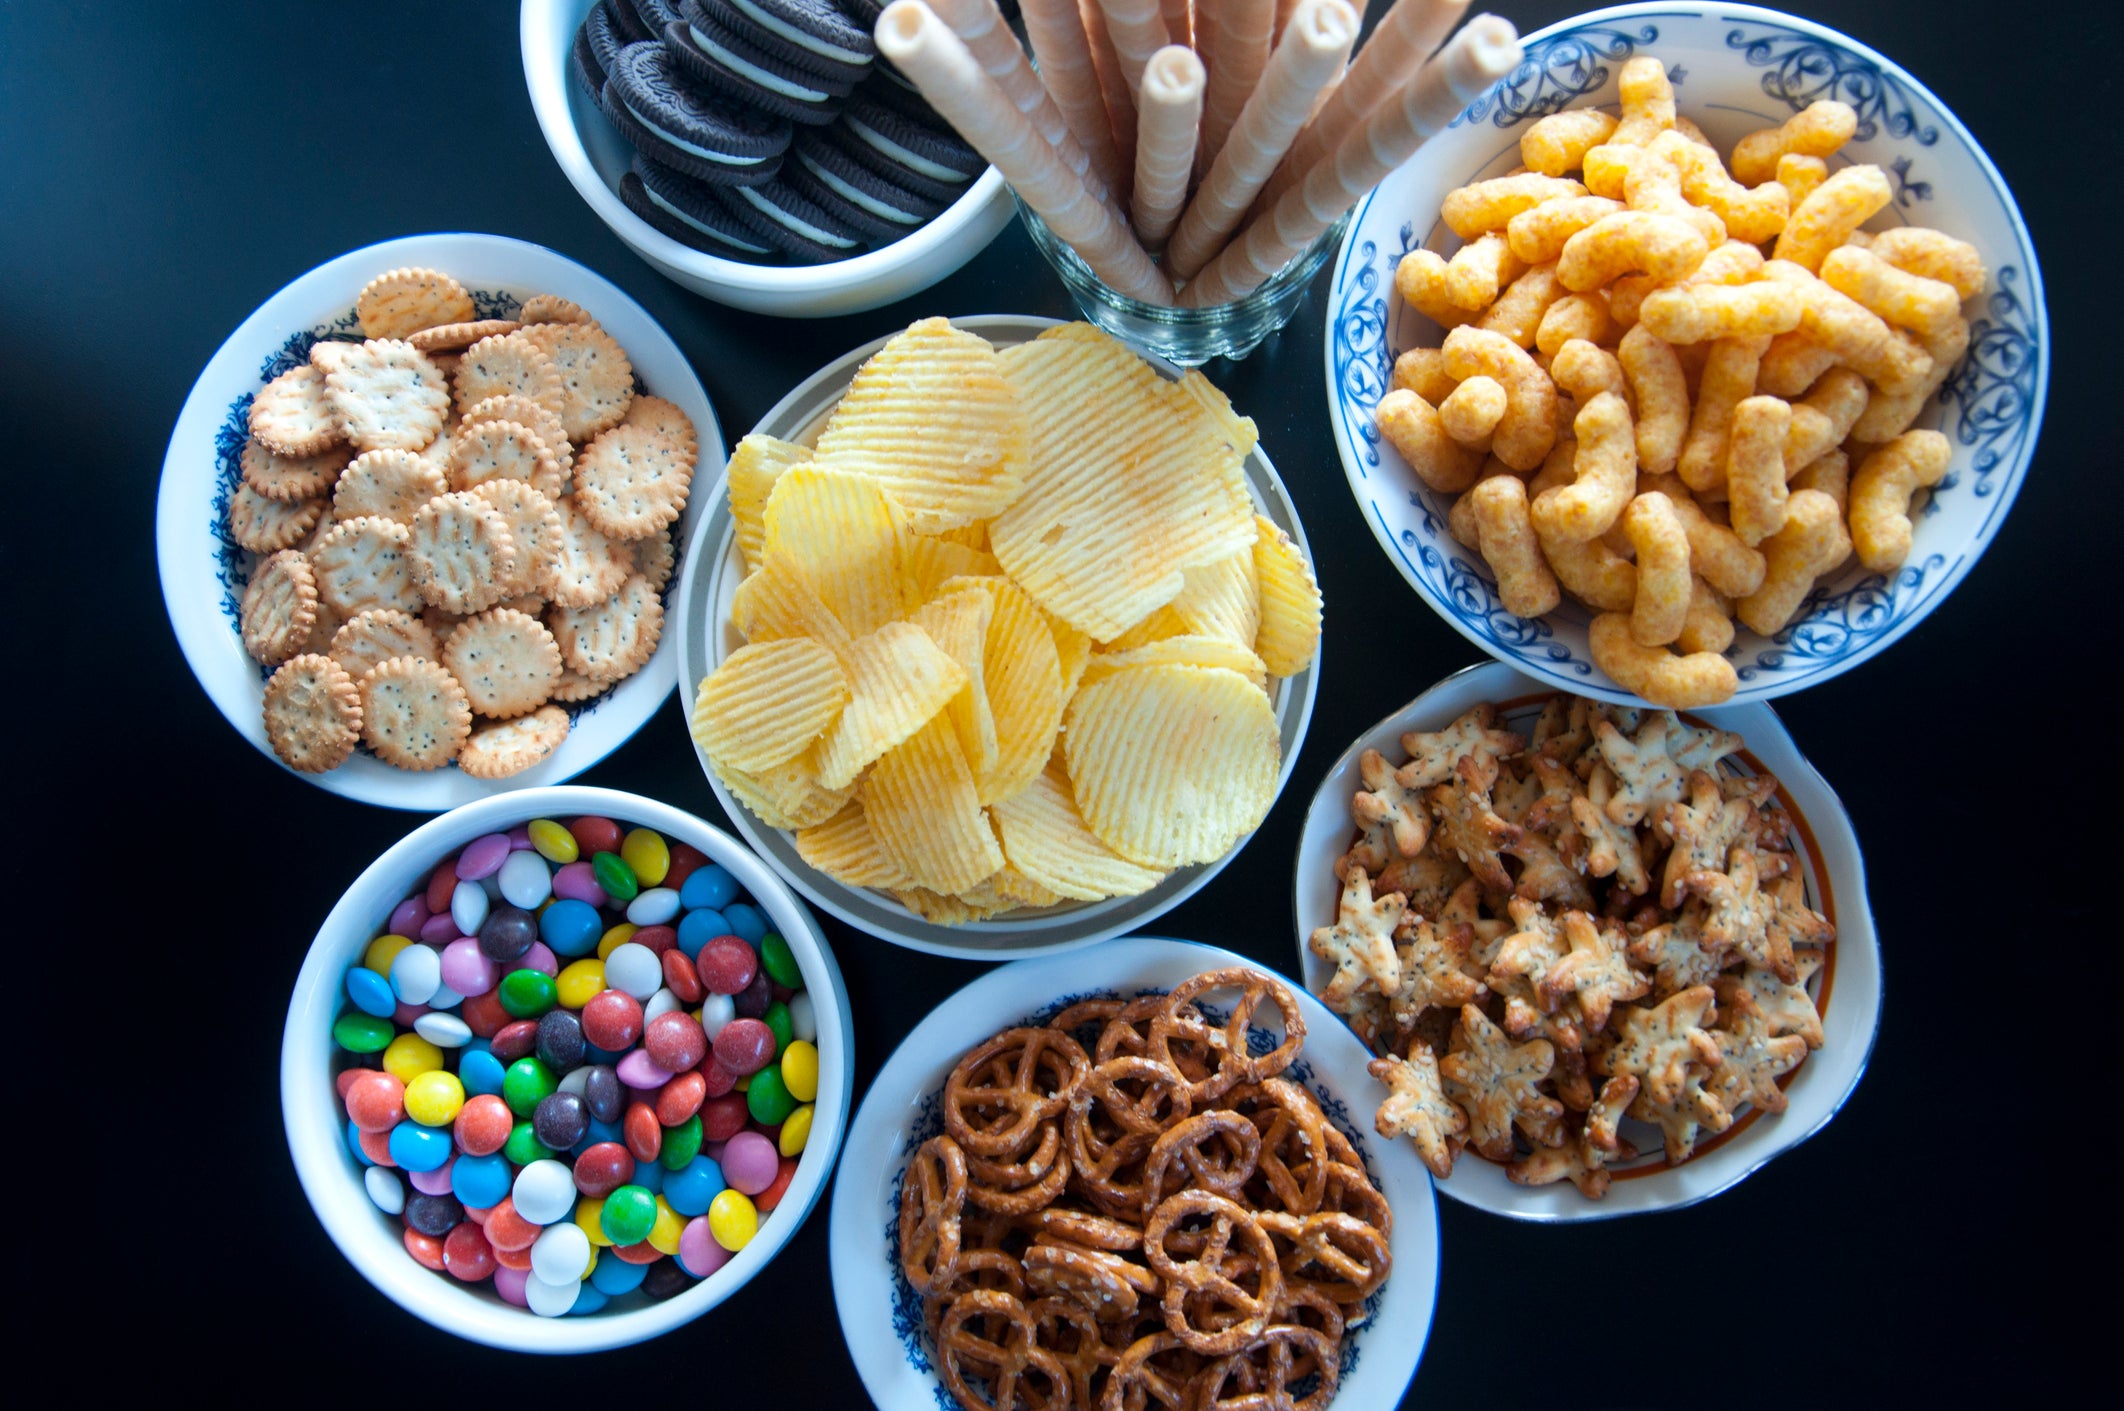 Some snacks can lead to mental health woes, researchers say